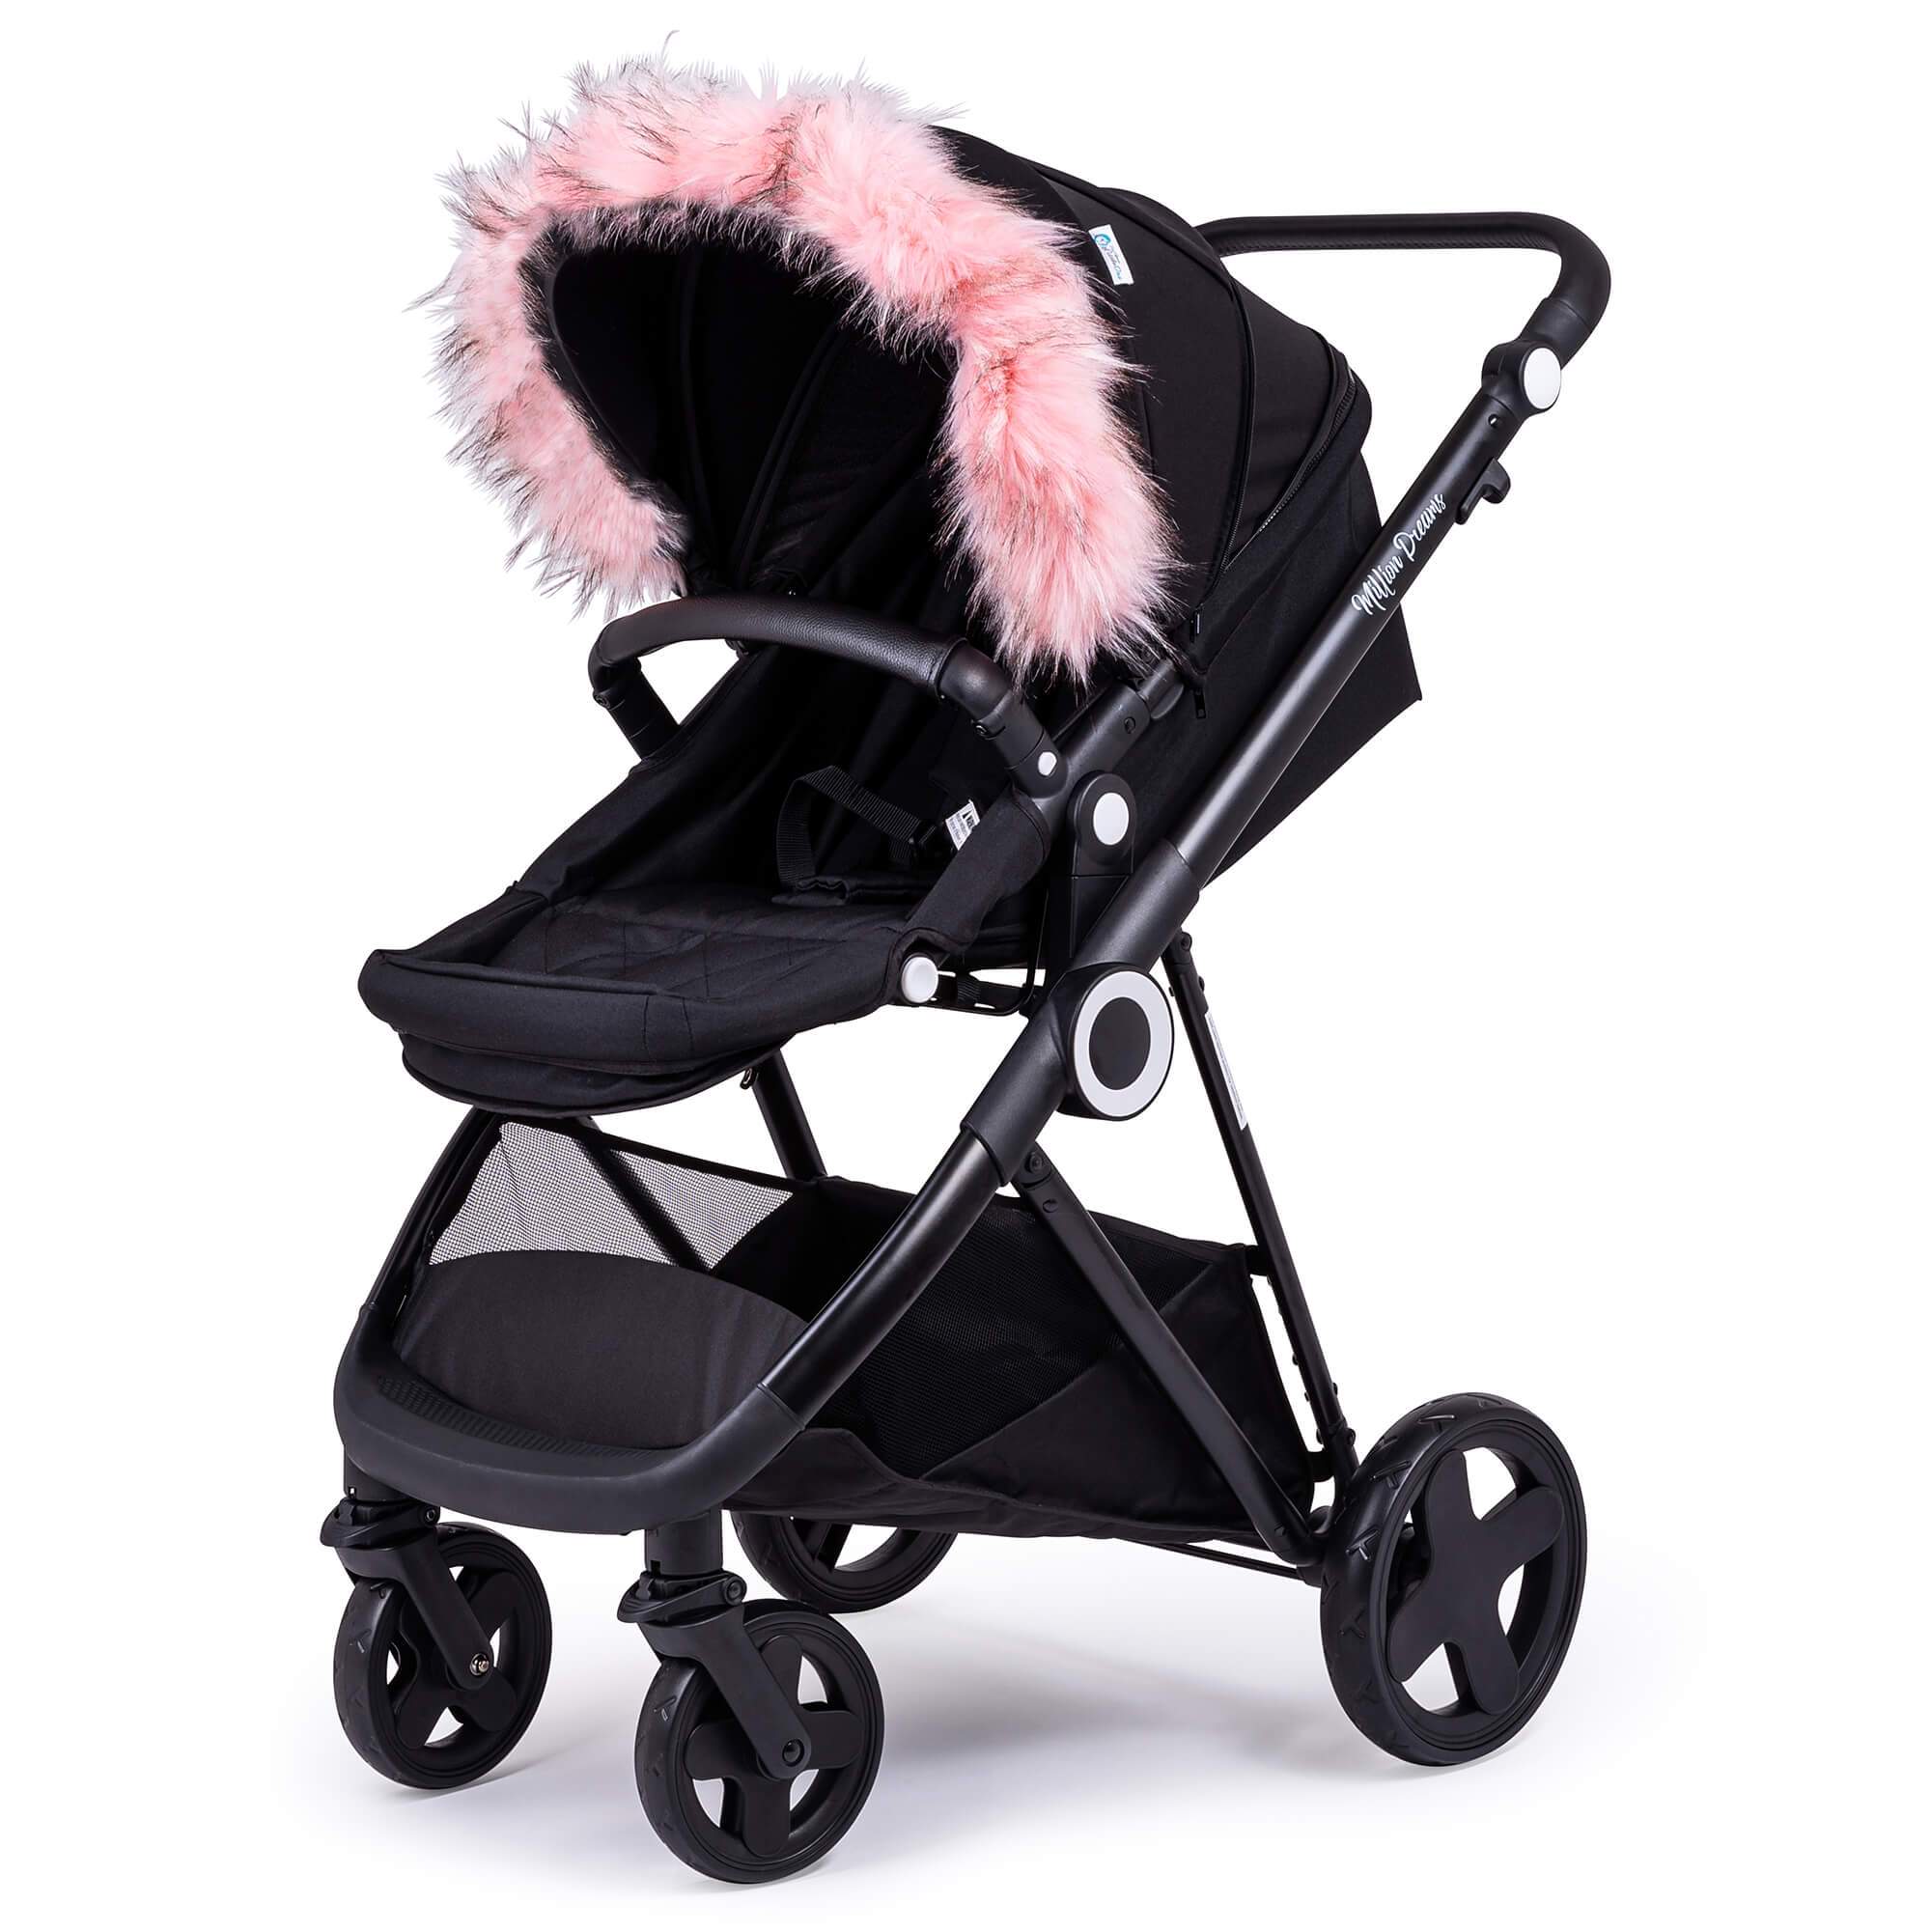 Pram Fur Hood Trim Attachment for Pushchair Compatible with Noukies - Light Pink / Fits All Models | For Your Little One